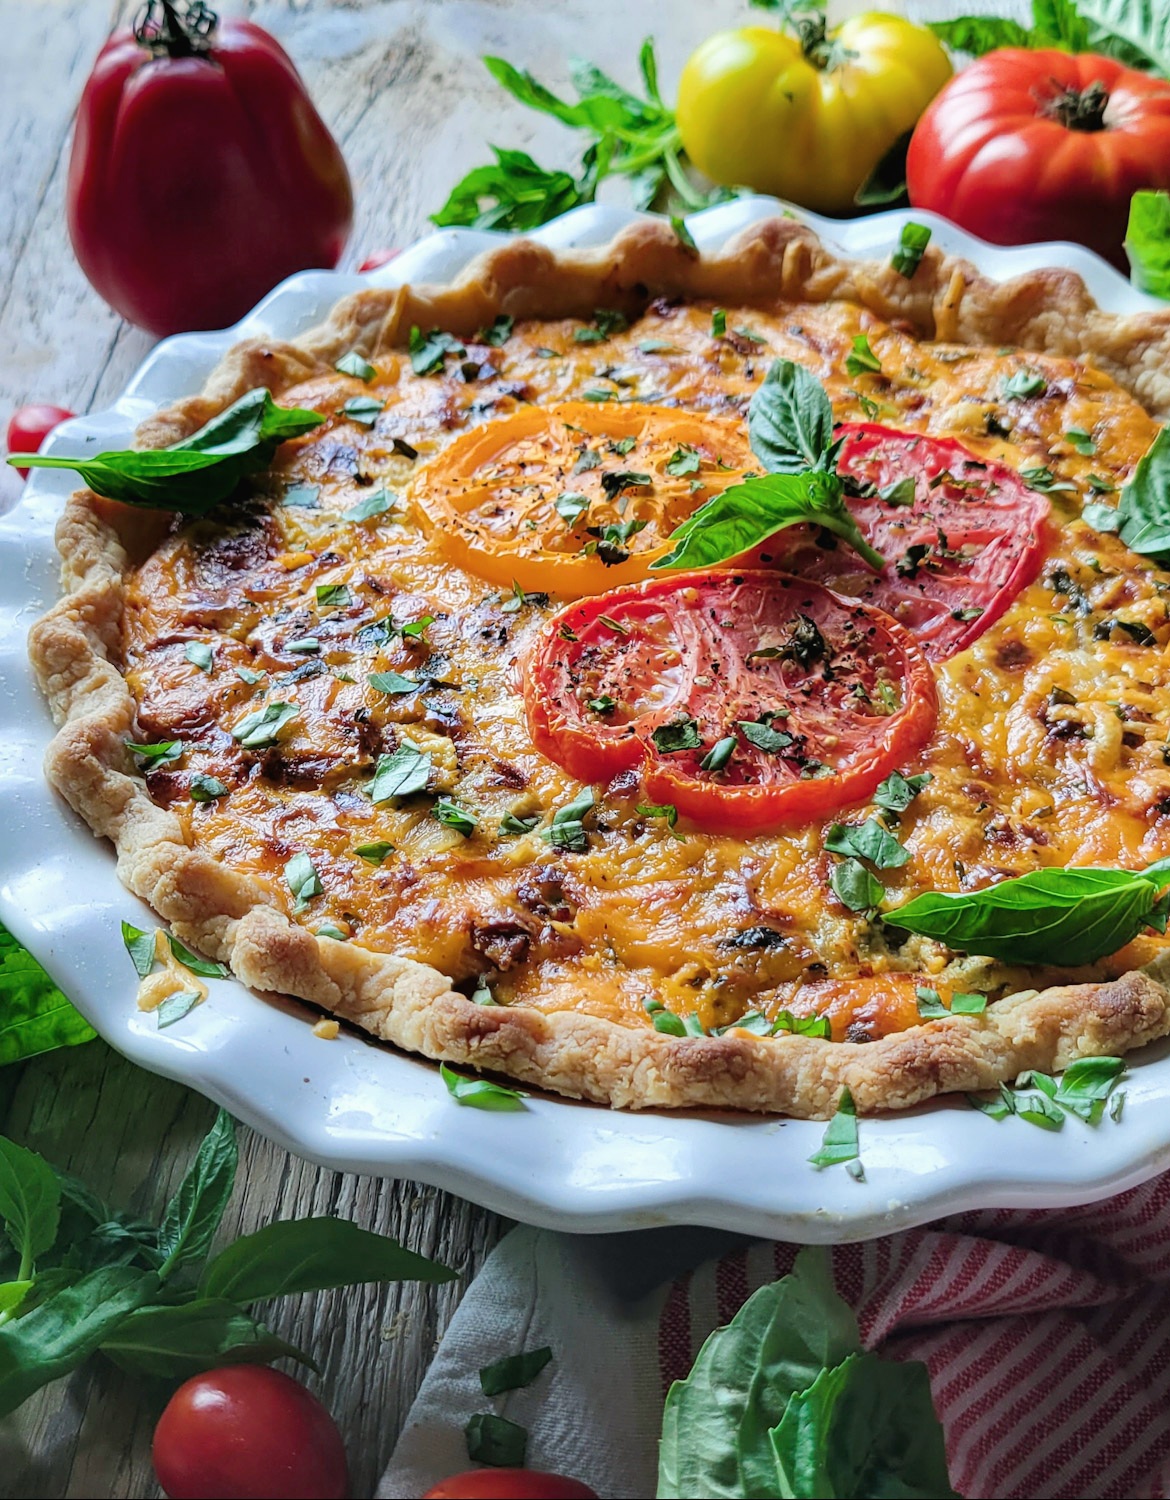 A fully baked Cheesy Tomato Pie cooling on the counter surrounded by fresh tomatoes and basil.